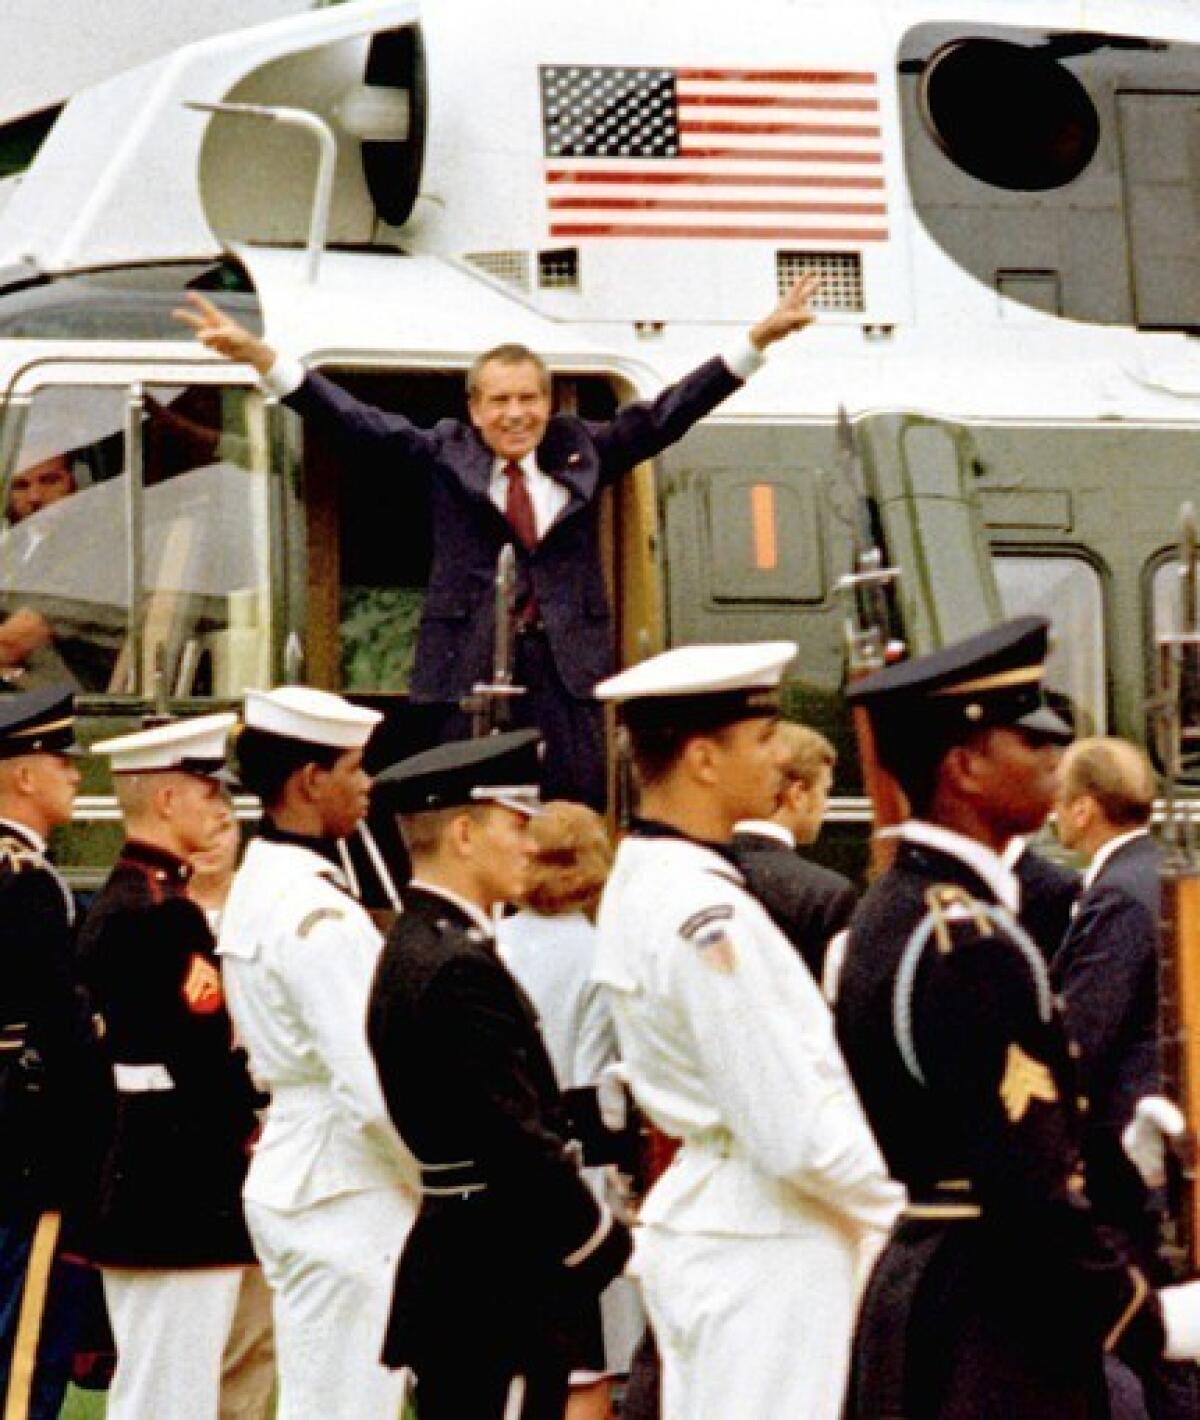 President Richard Nixon left Washington in August 1974, but the Watergate controversy followed him.